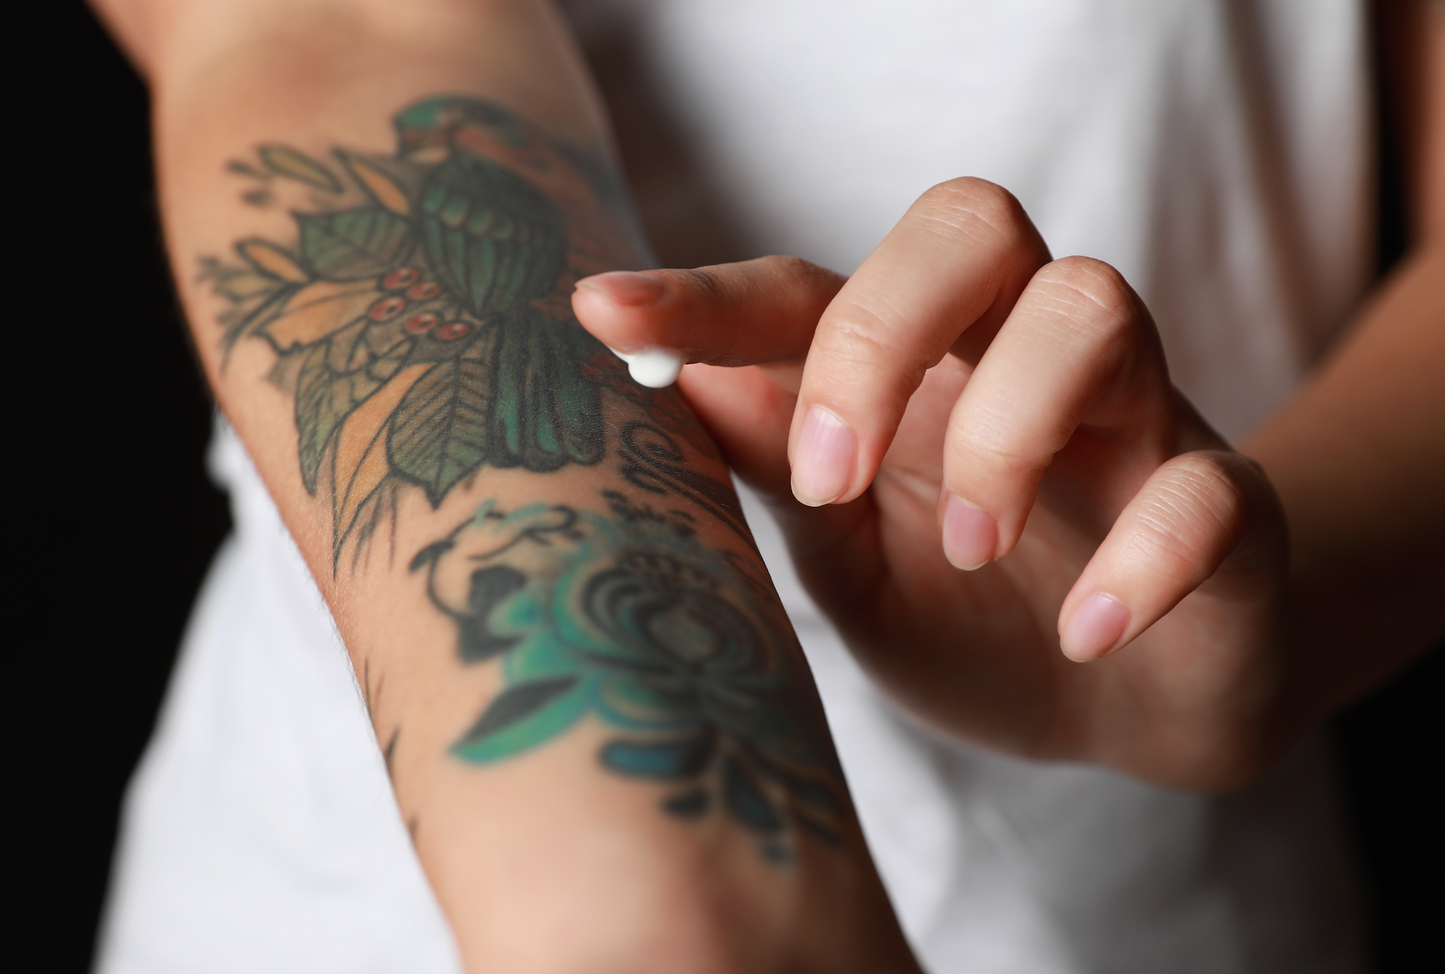 Tattoo Aftercare Guide || how to take care of new tattoo , when can I shower with new tattoo , best tattoo cream , how to relieve itchy tattoo , tattoo itchiness relief , what can I put on itchy tattoo , best tattoo moisturizer